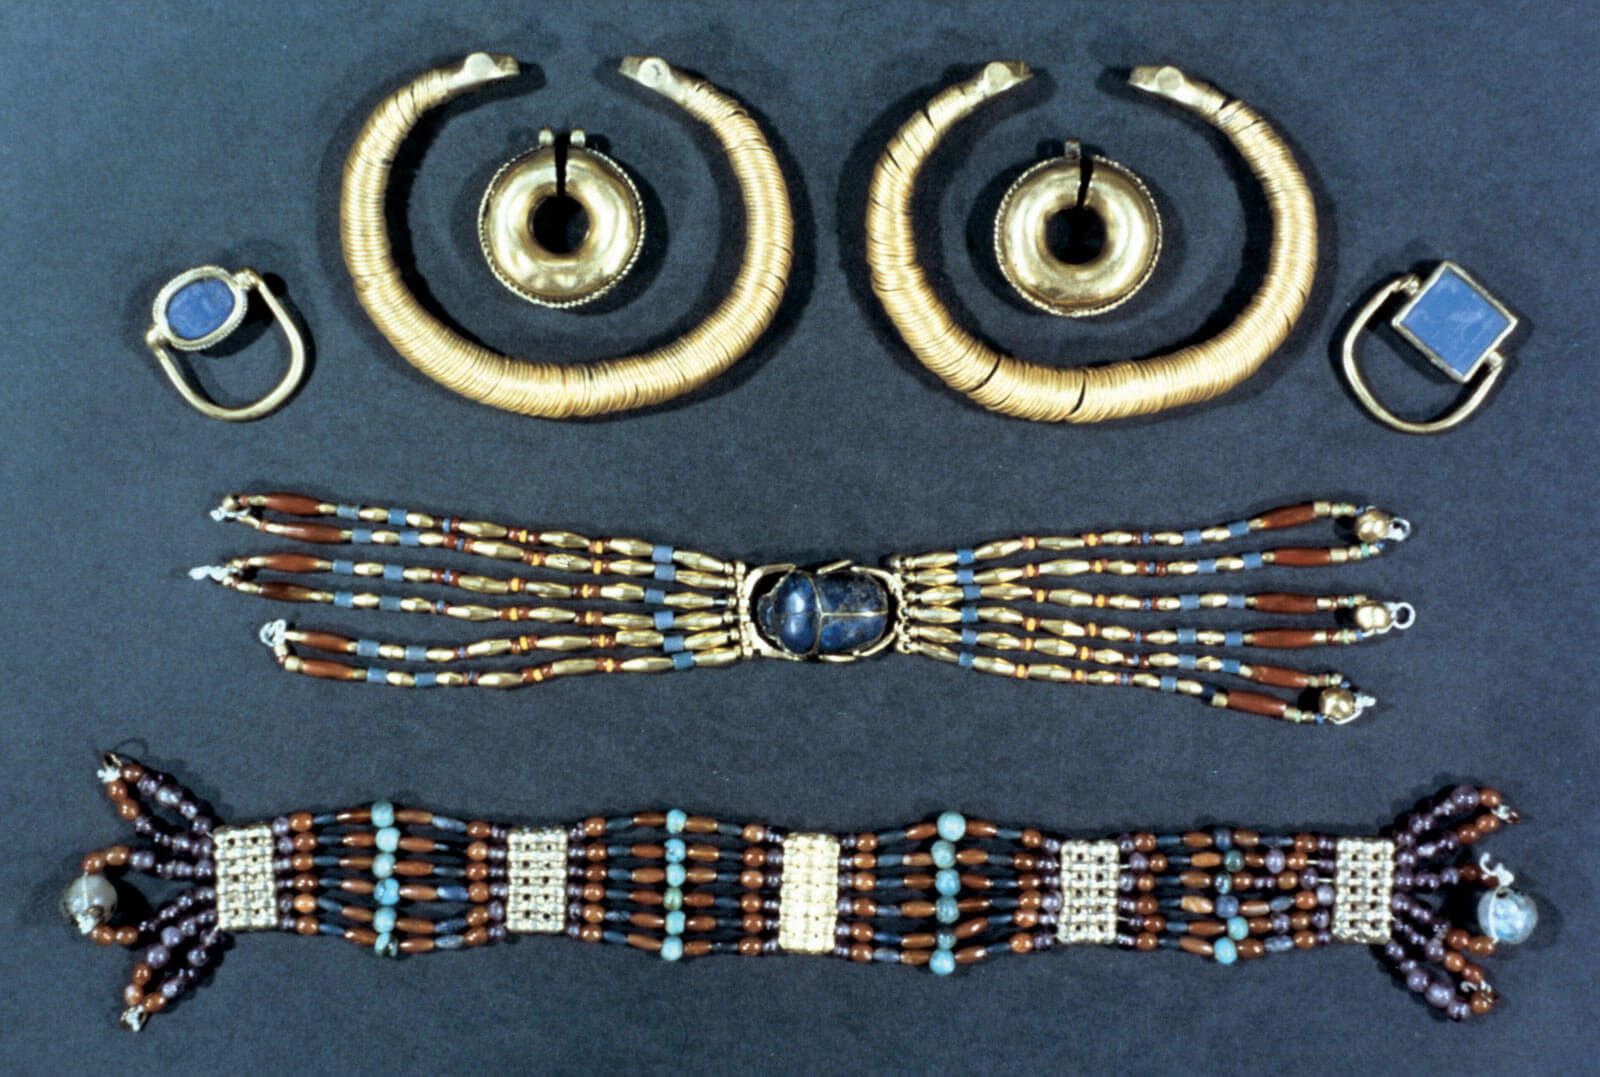 Image Showing Ancient Egypt Jewelry History at British Museum